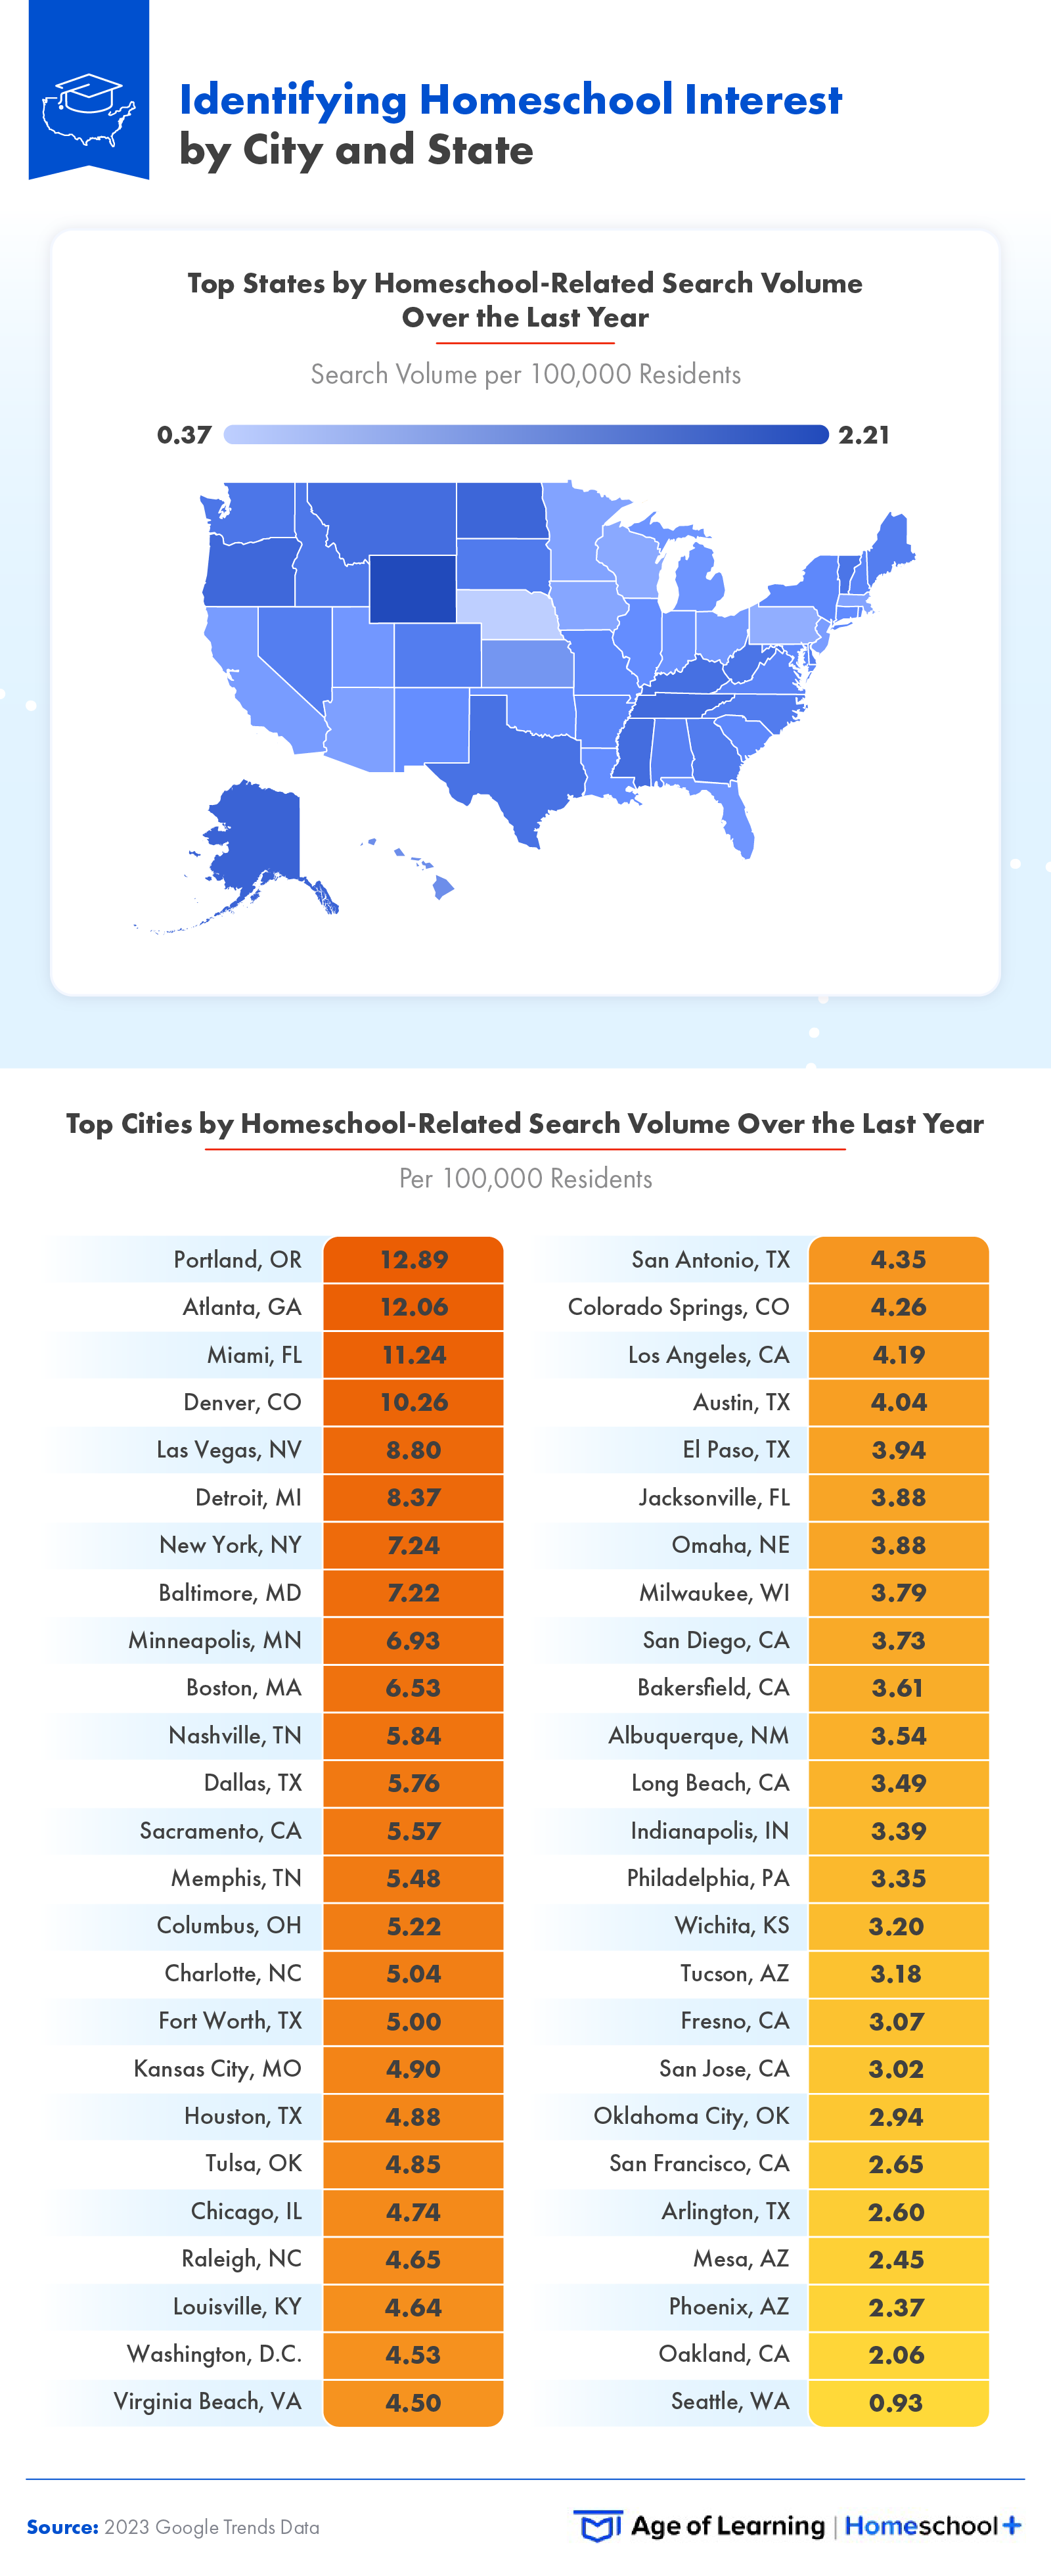 This infographic explores the top states and cities by homeschool-related search volume over the last year.